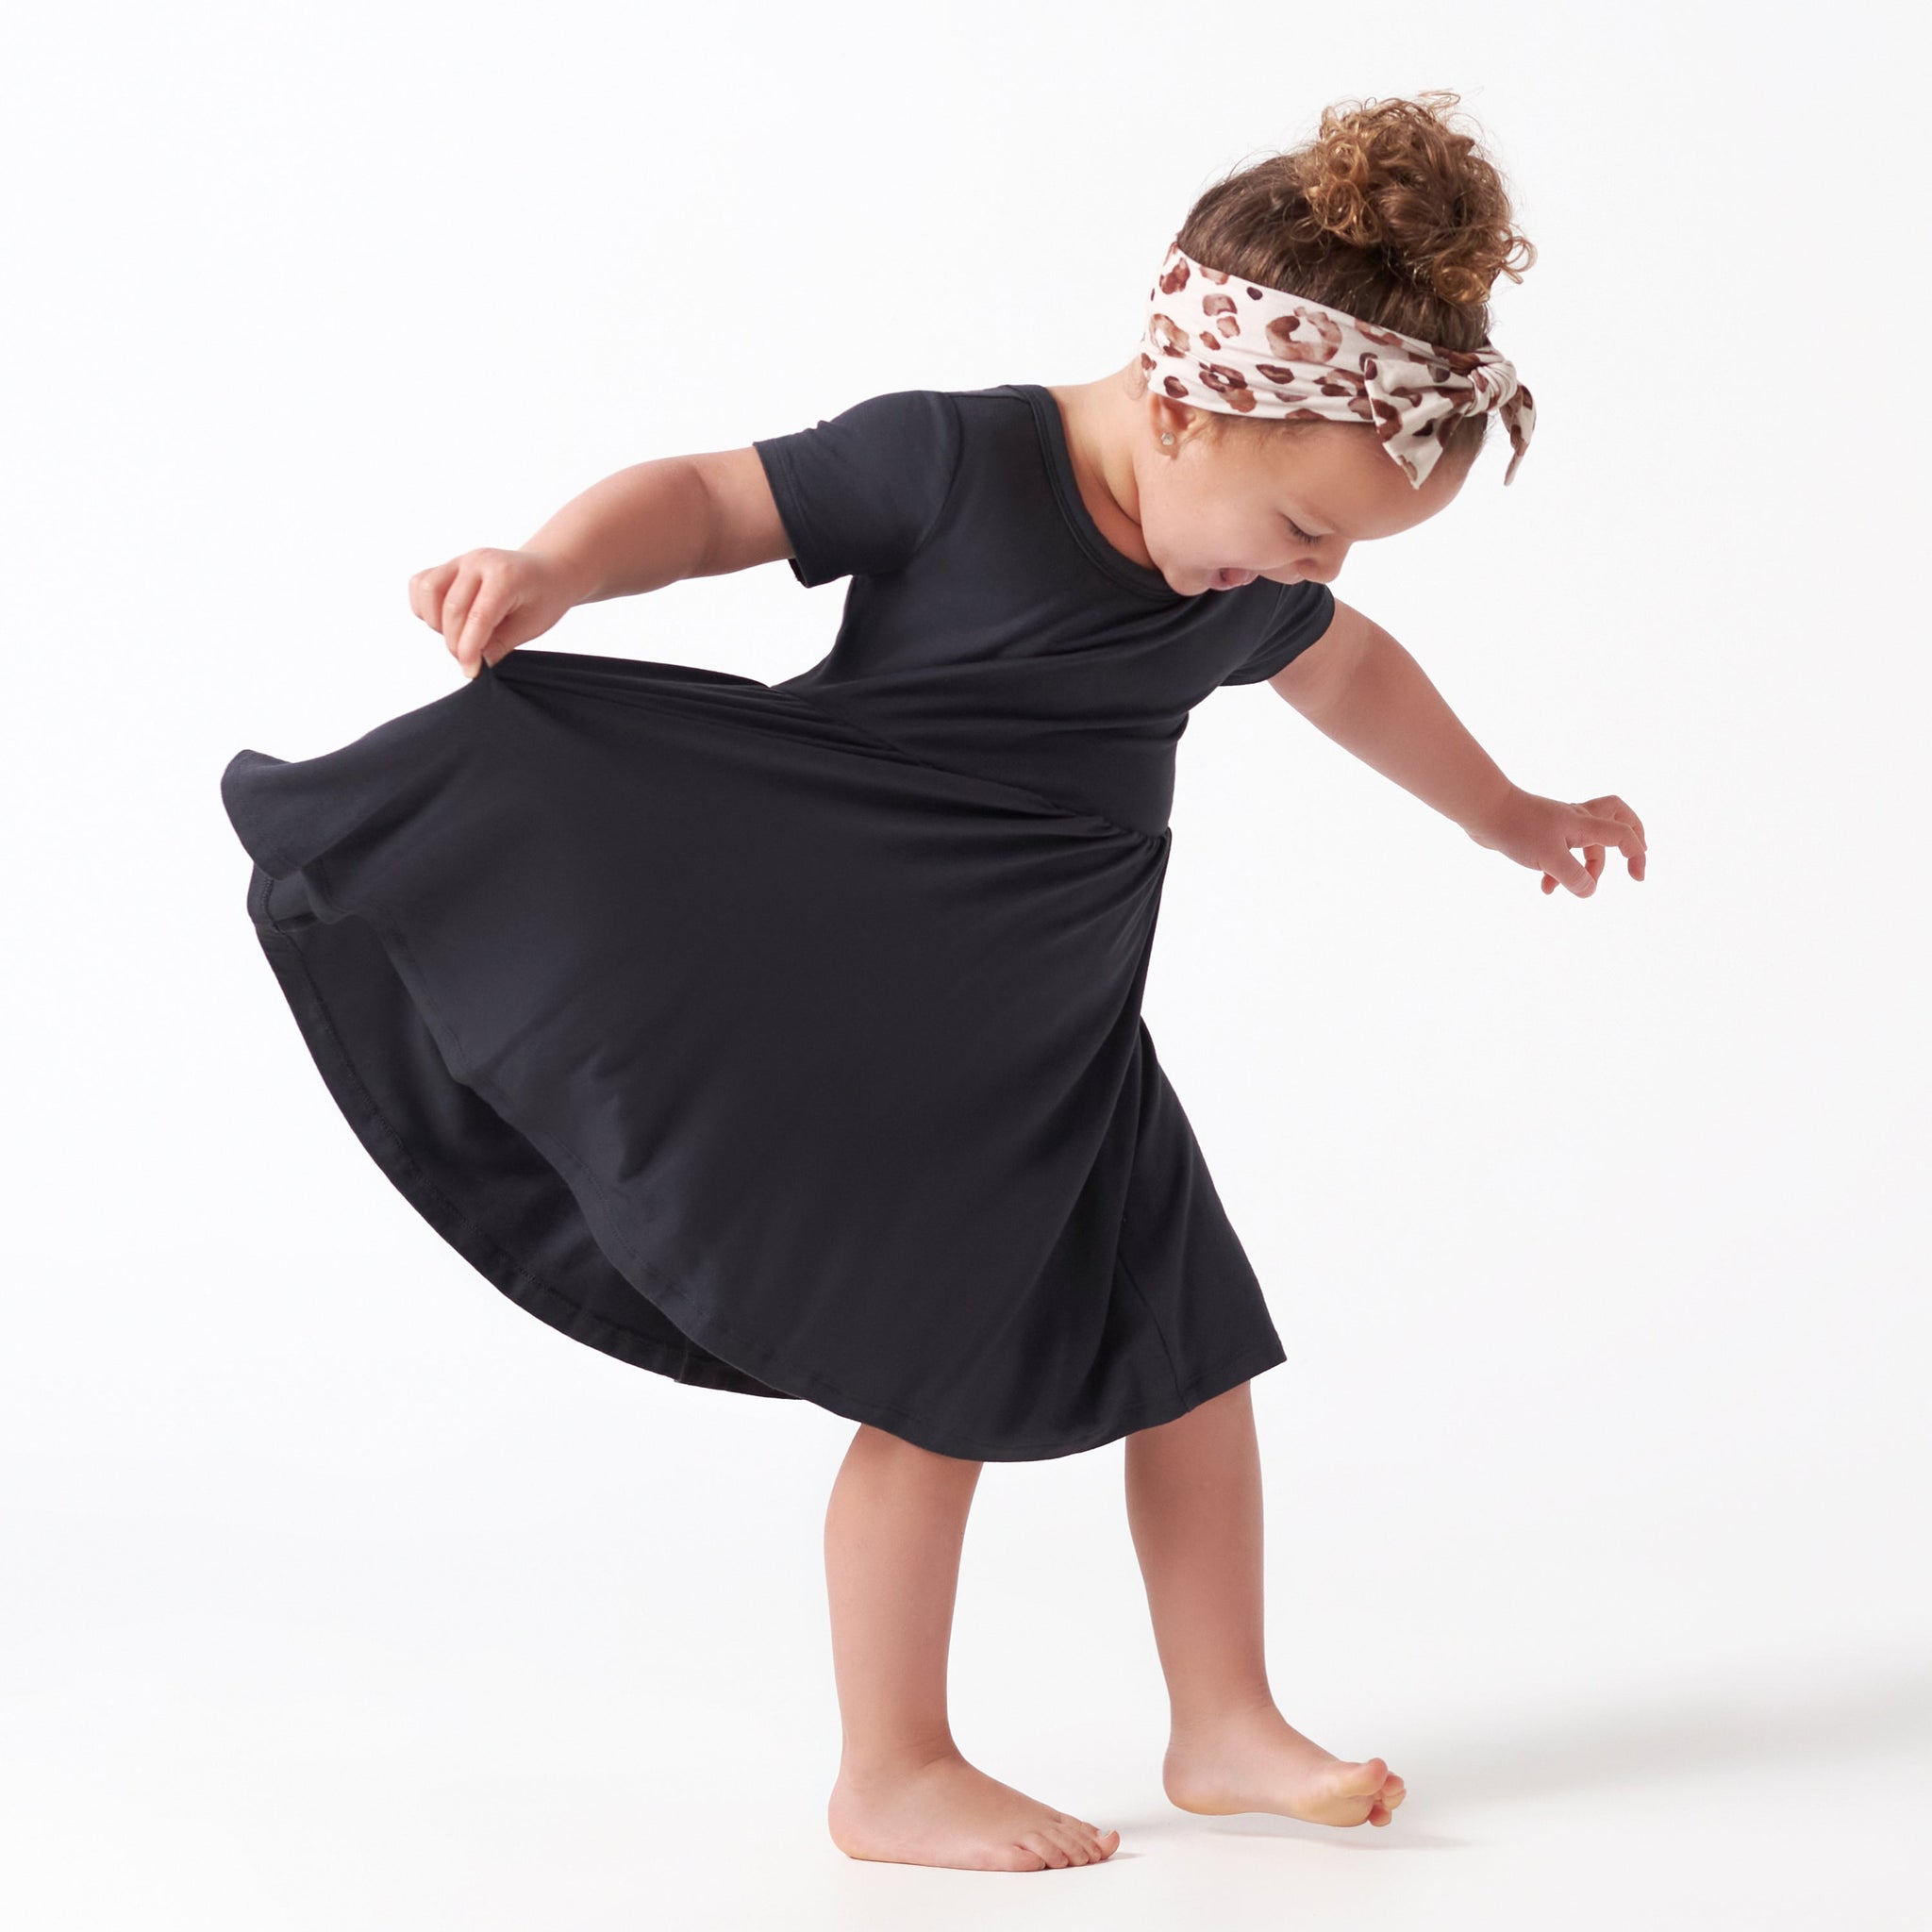 Infant & Toddler Girls Shadow Buttery Soft Viscose Made from Eucalyptus Twirl Dress-Gerber Childrenswear Wholesale